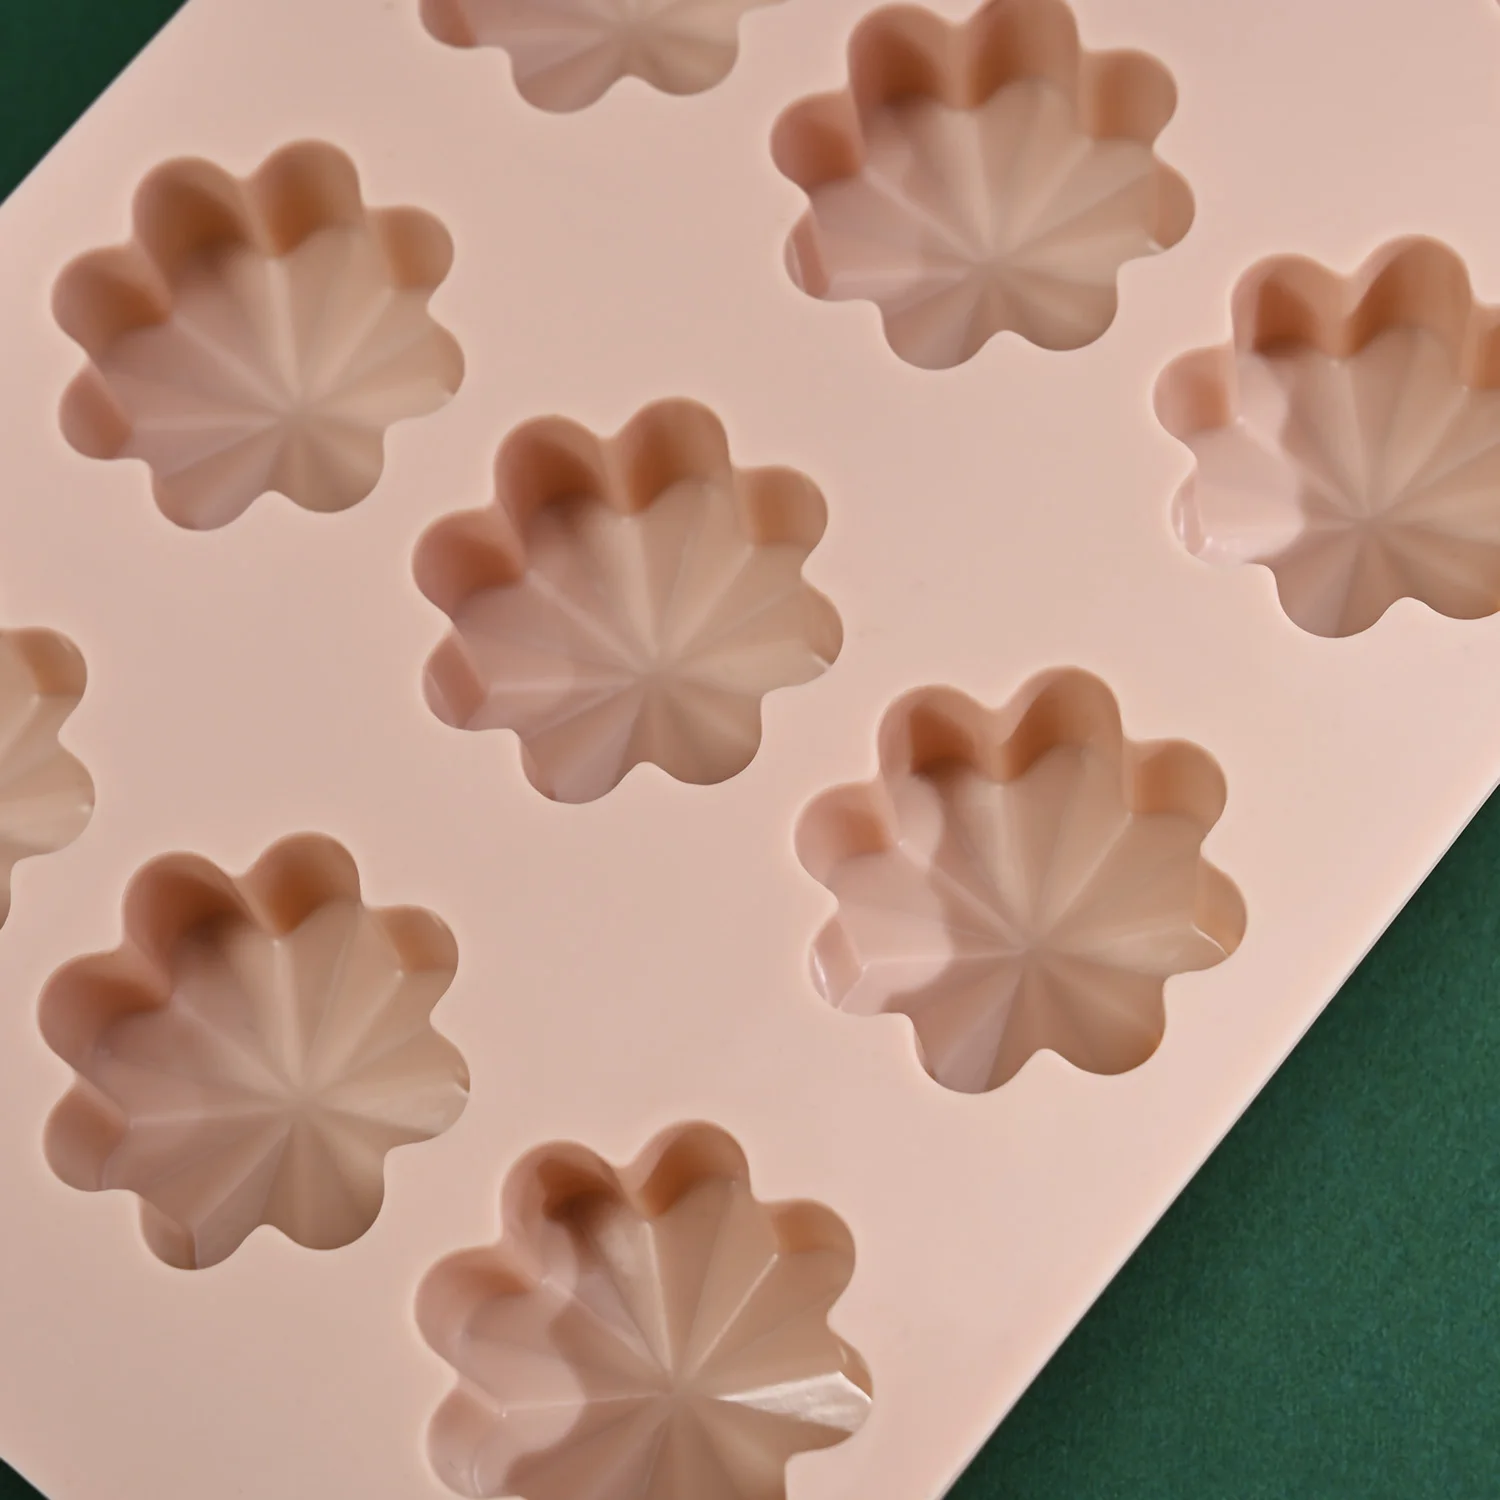 Reusable 15 Cavity Flower Shaped Silicone Chocolate Mold Kitchen Baking Tool With Color Card Package